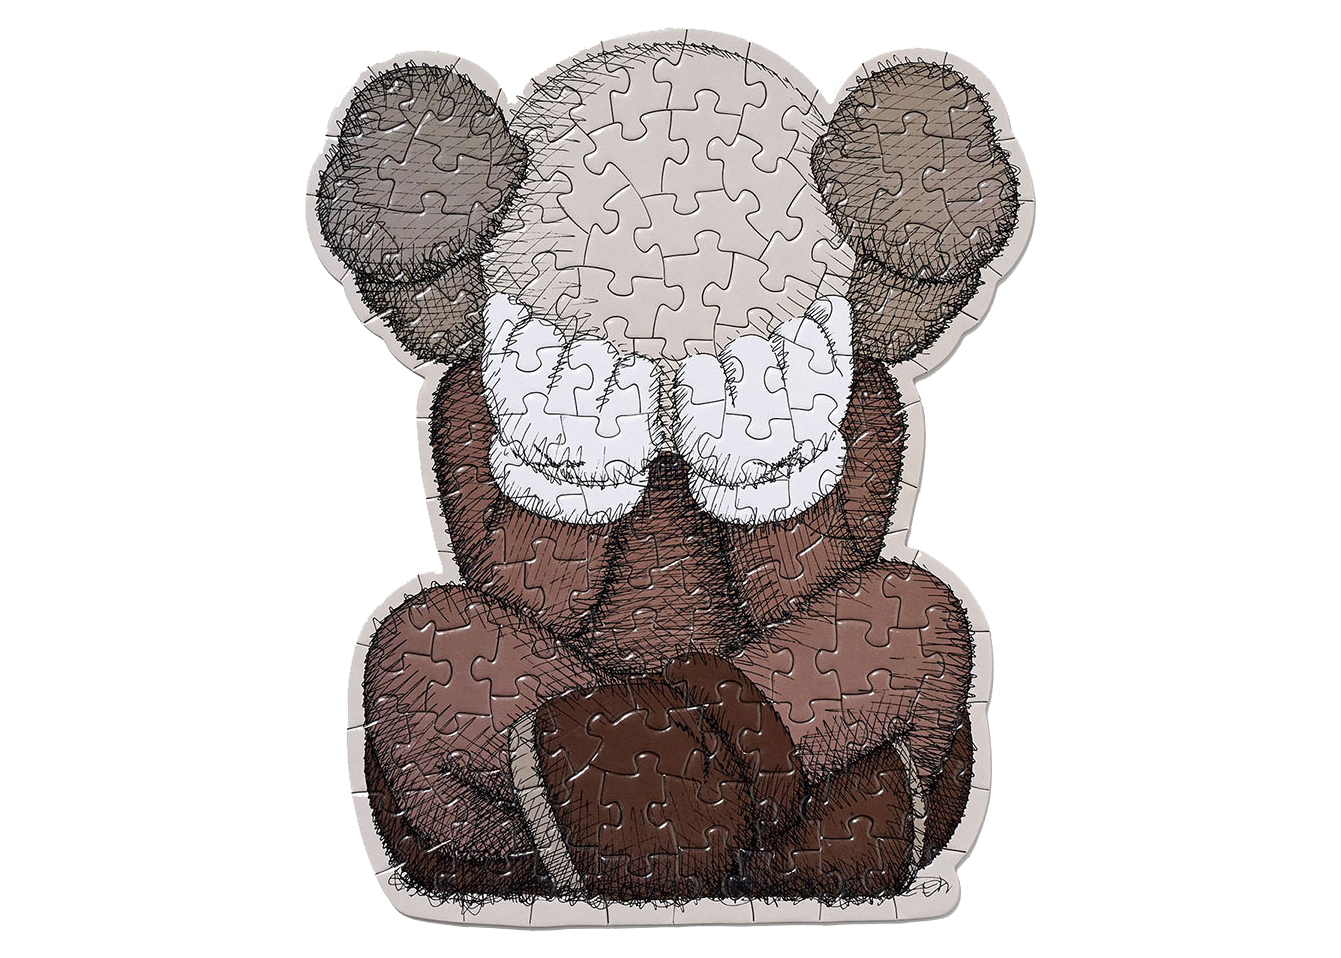 KAWS TOKYO FIRST Puzzle 1000 pieces 2個エンタメ/ホビー - limarru ...